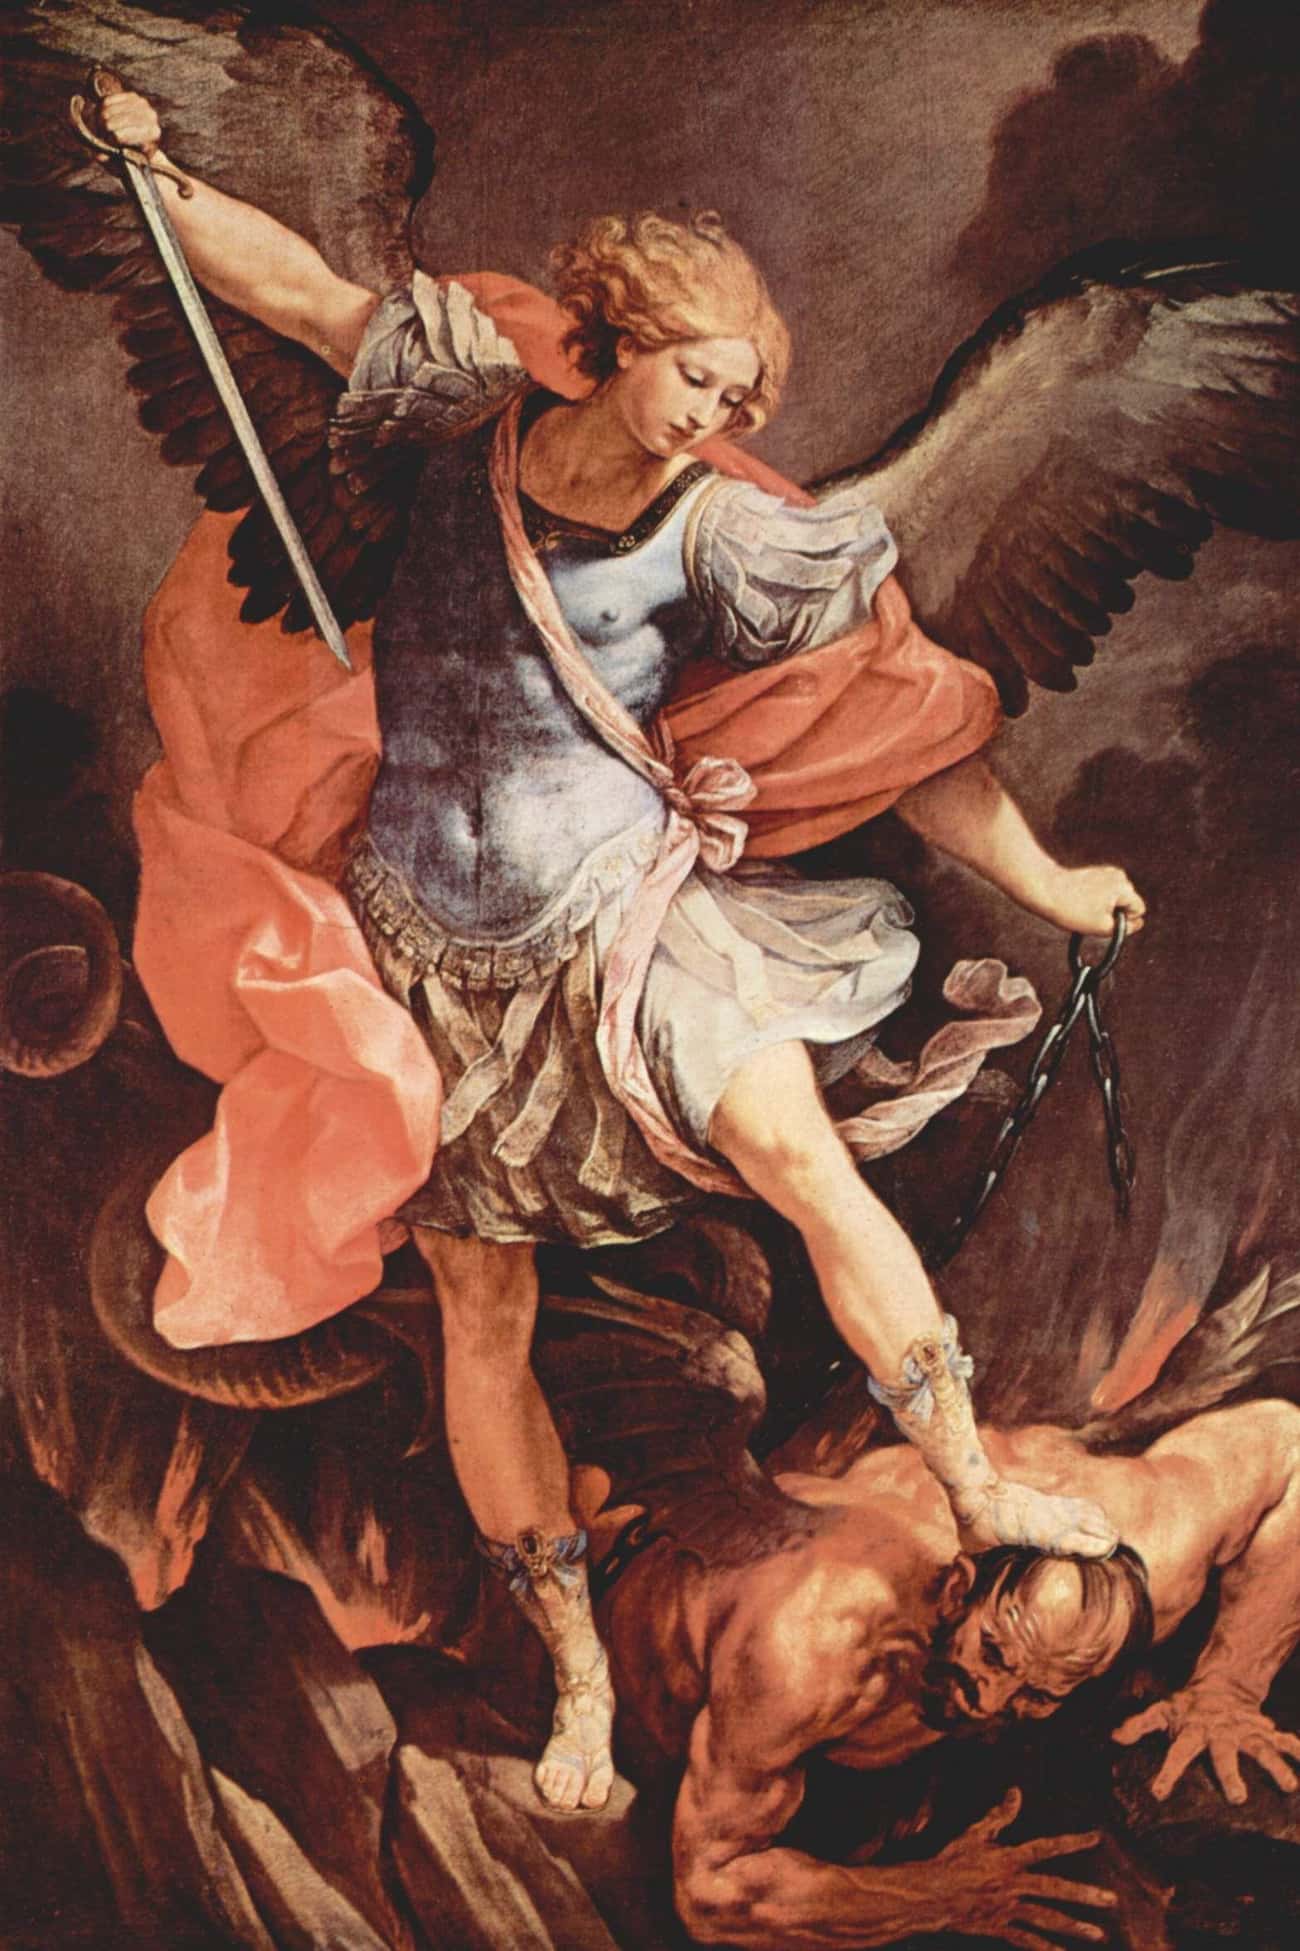 Satan Was Once An Archangel Named Lucifer